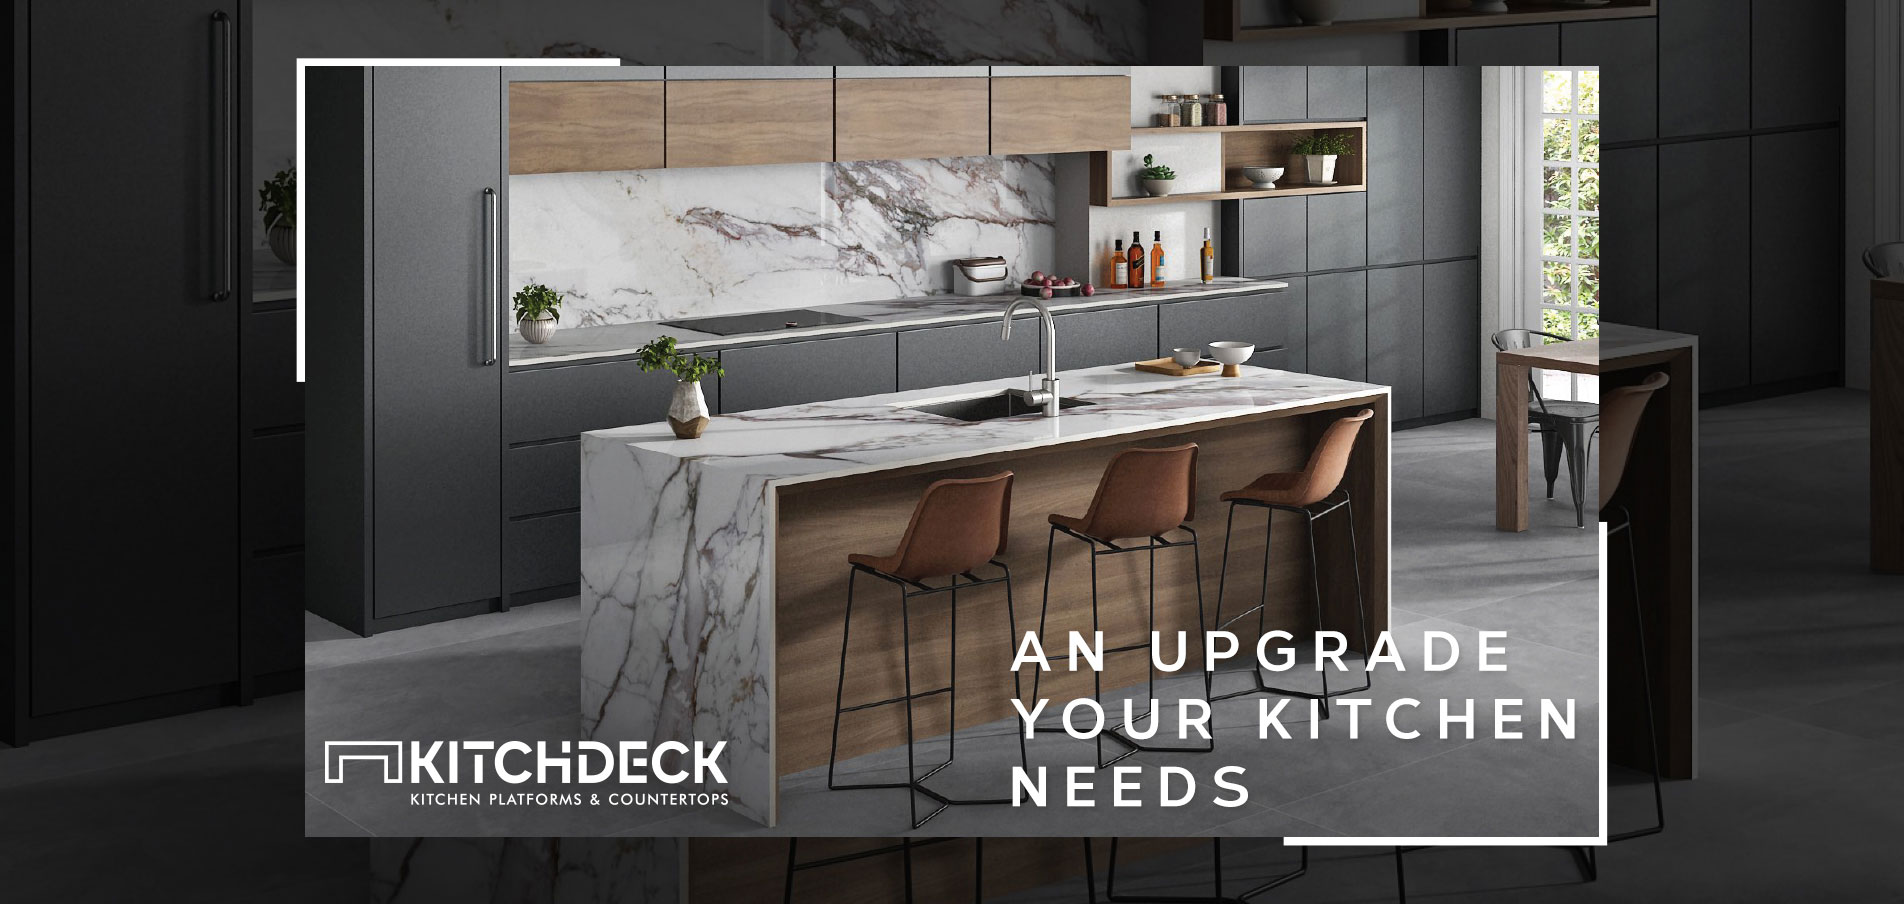 Kitchdeck: Upgrade Your Kitchen with Simpolo Selection